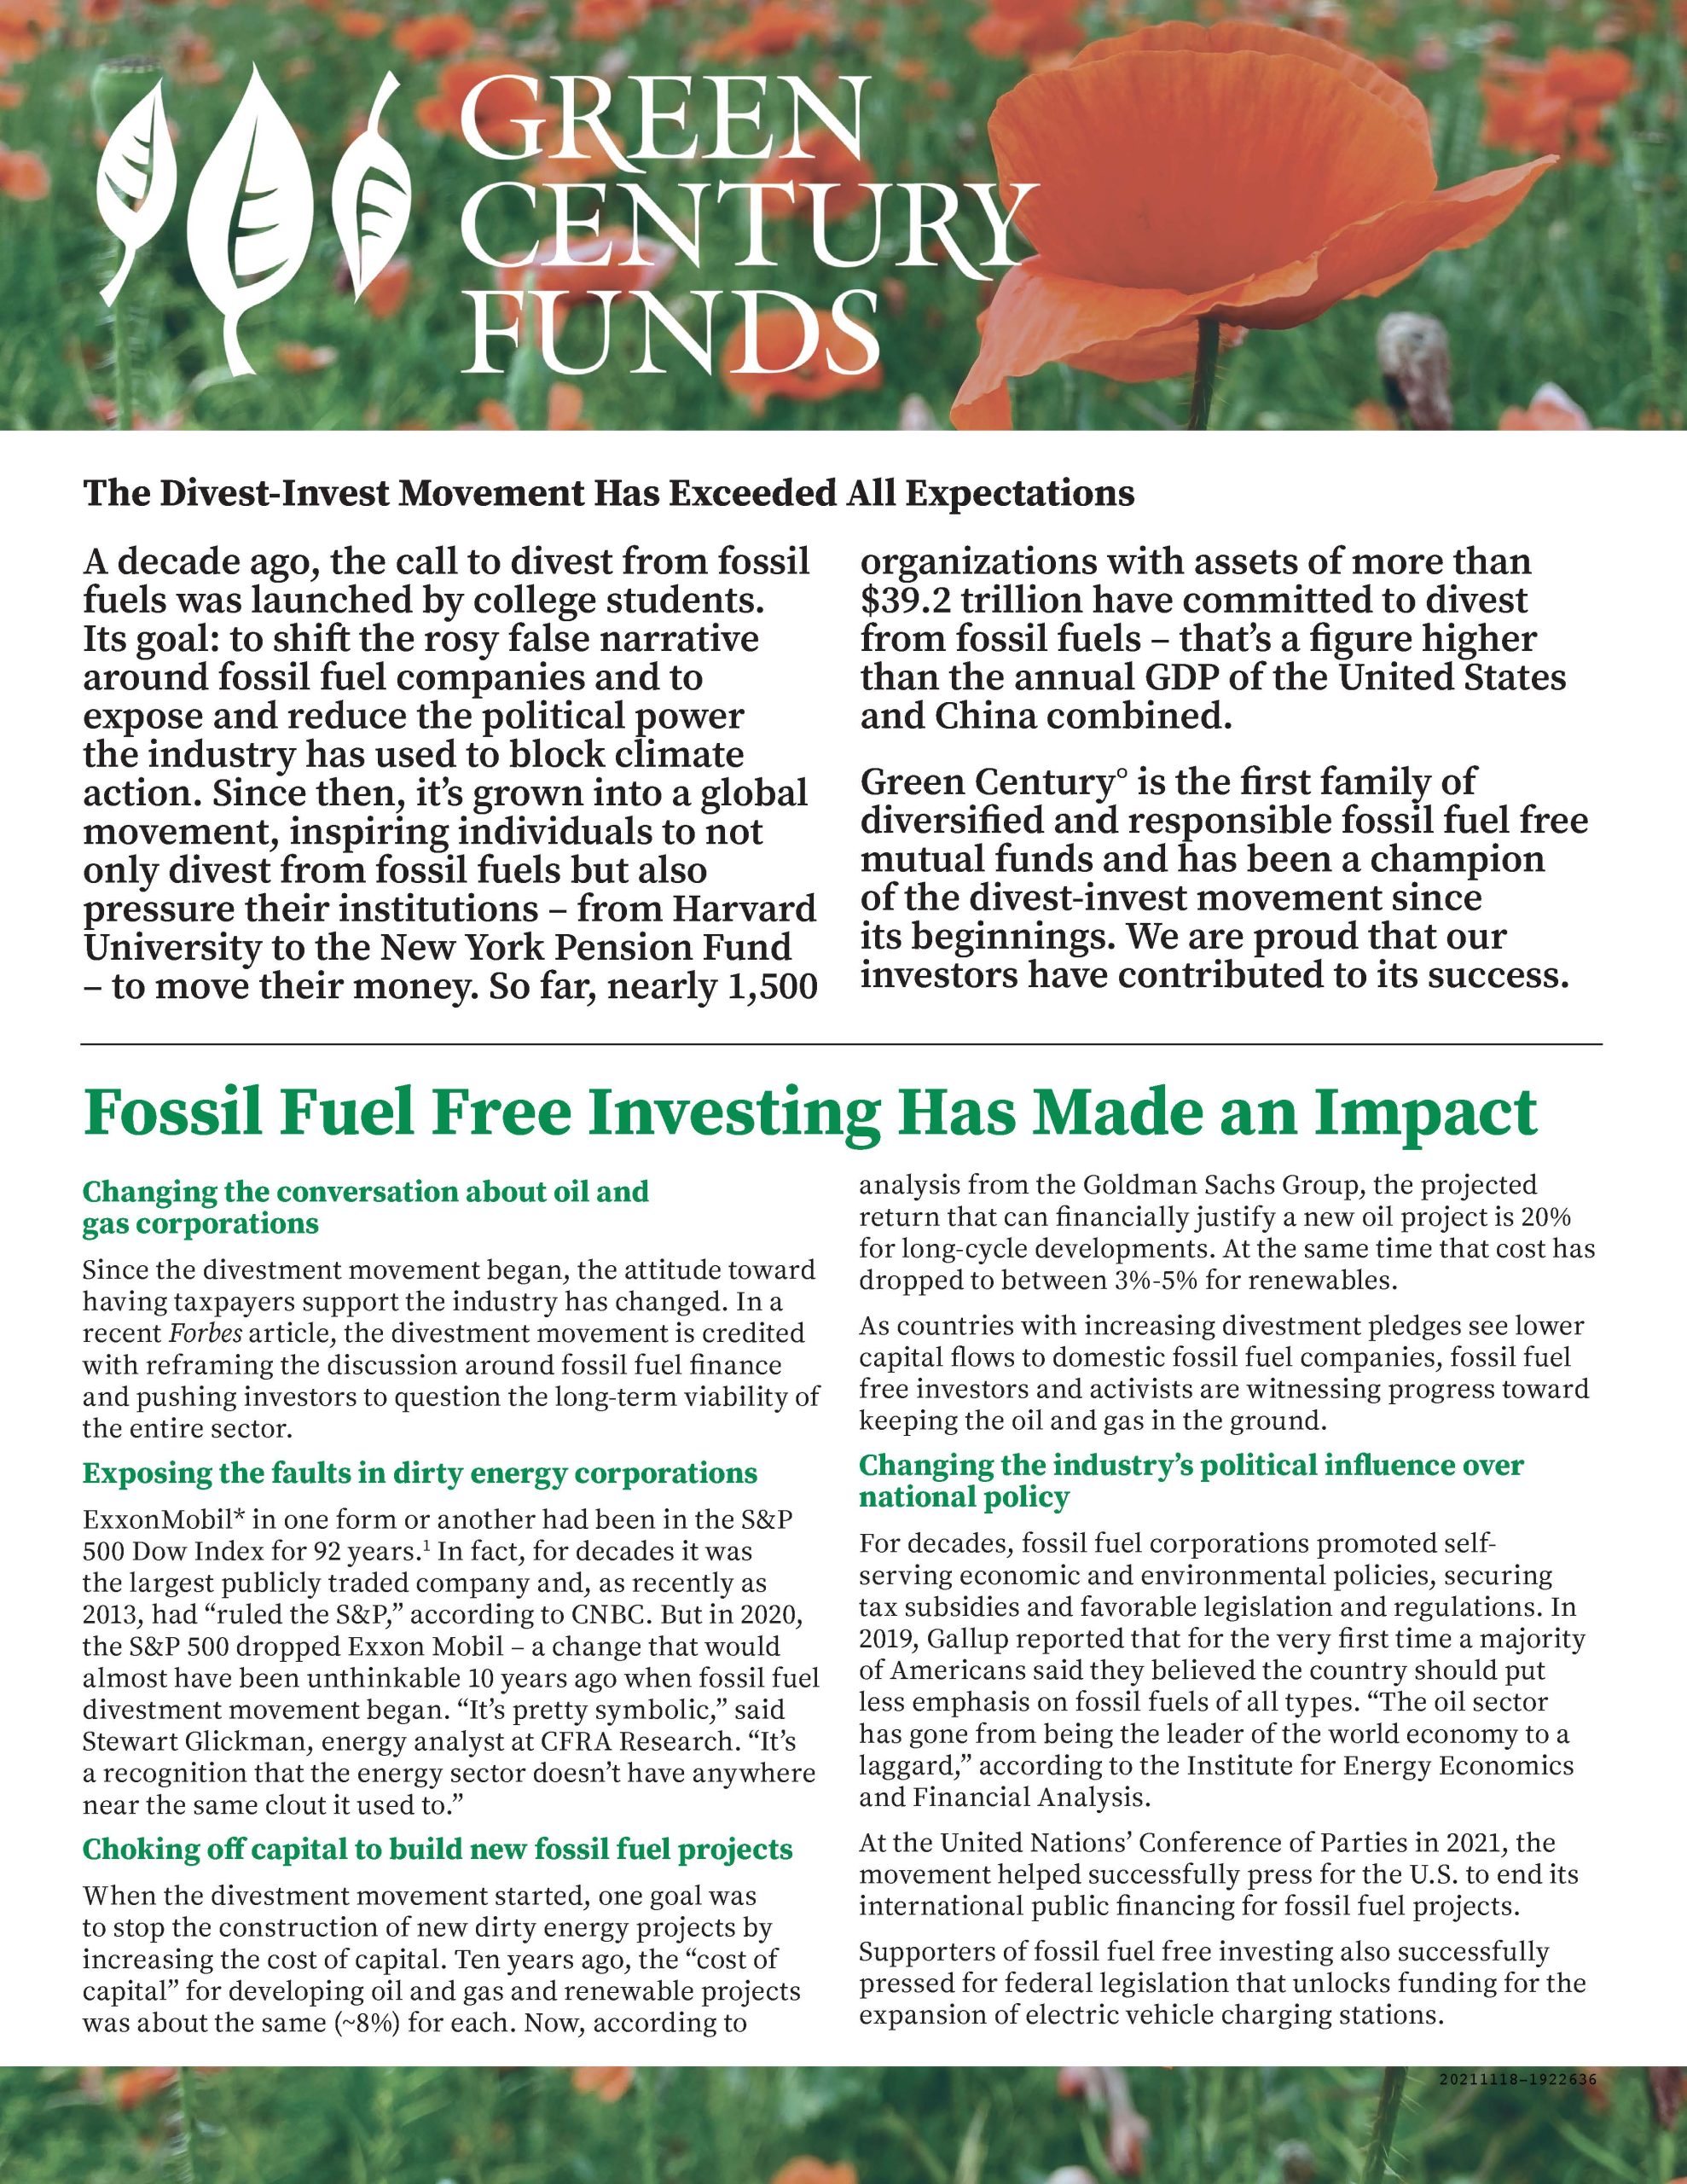 Success-of-FFF-Investing-2-pager-11.21_Page_1